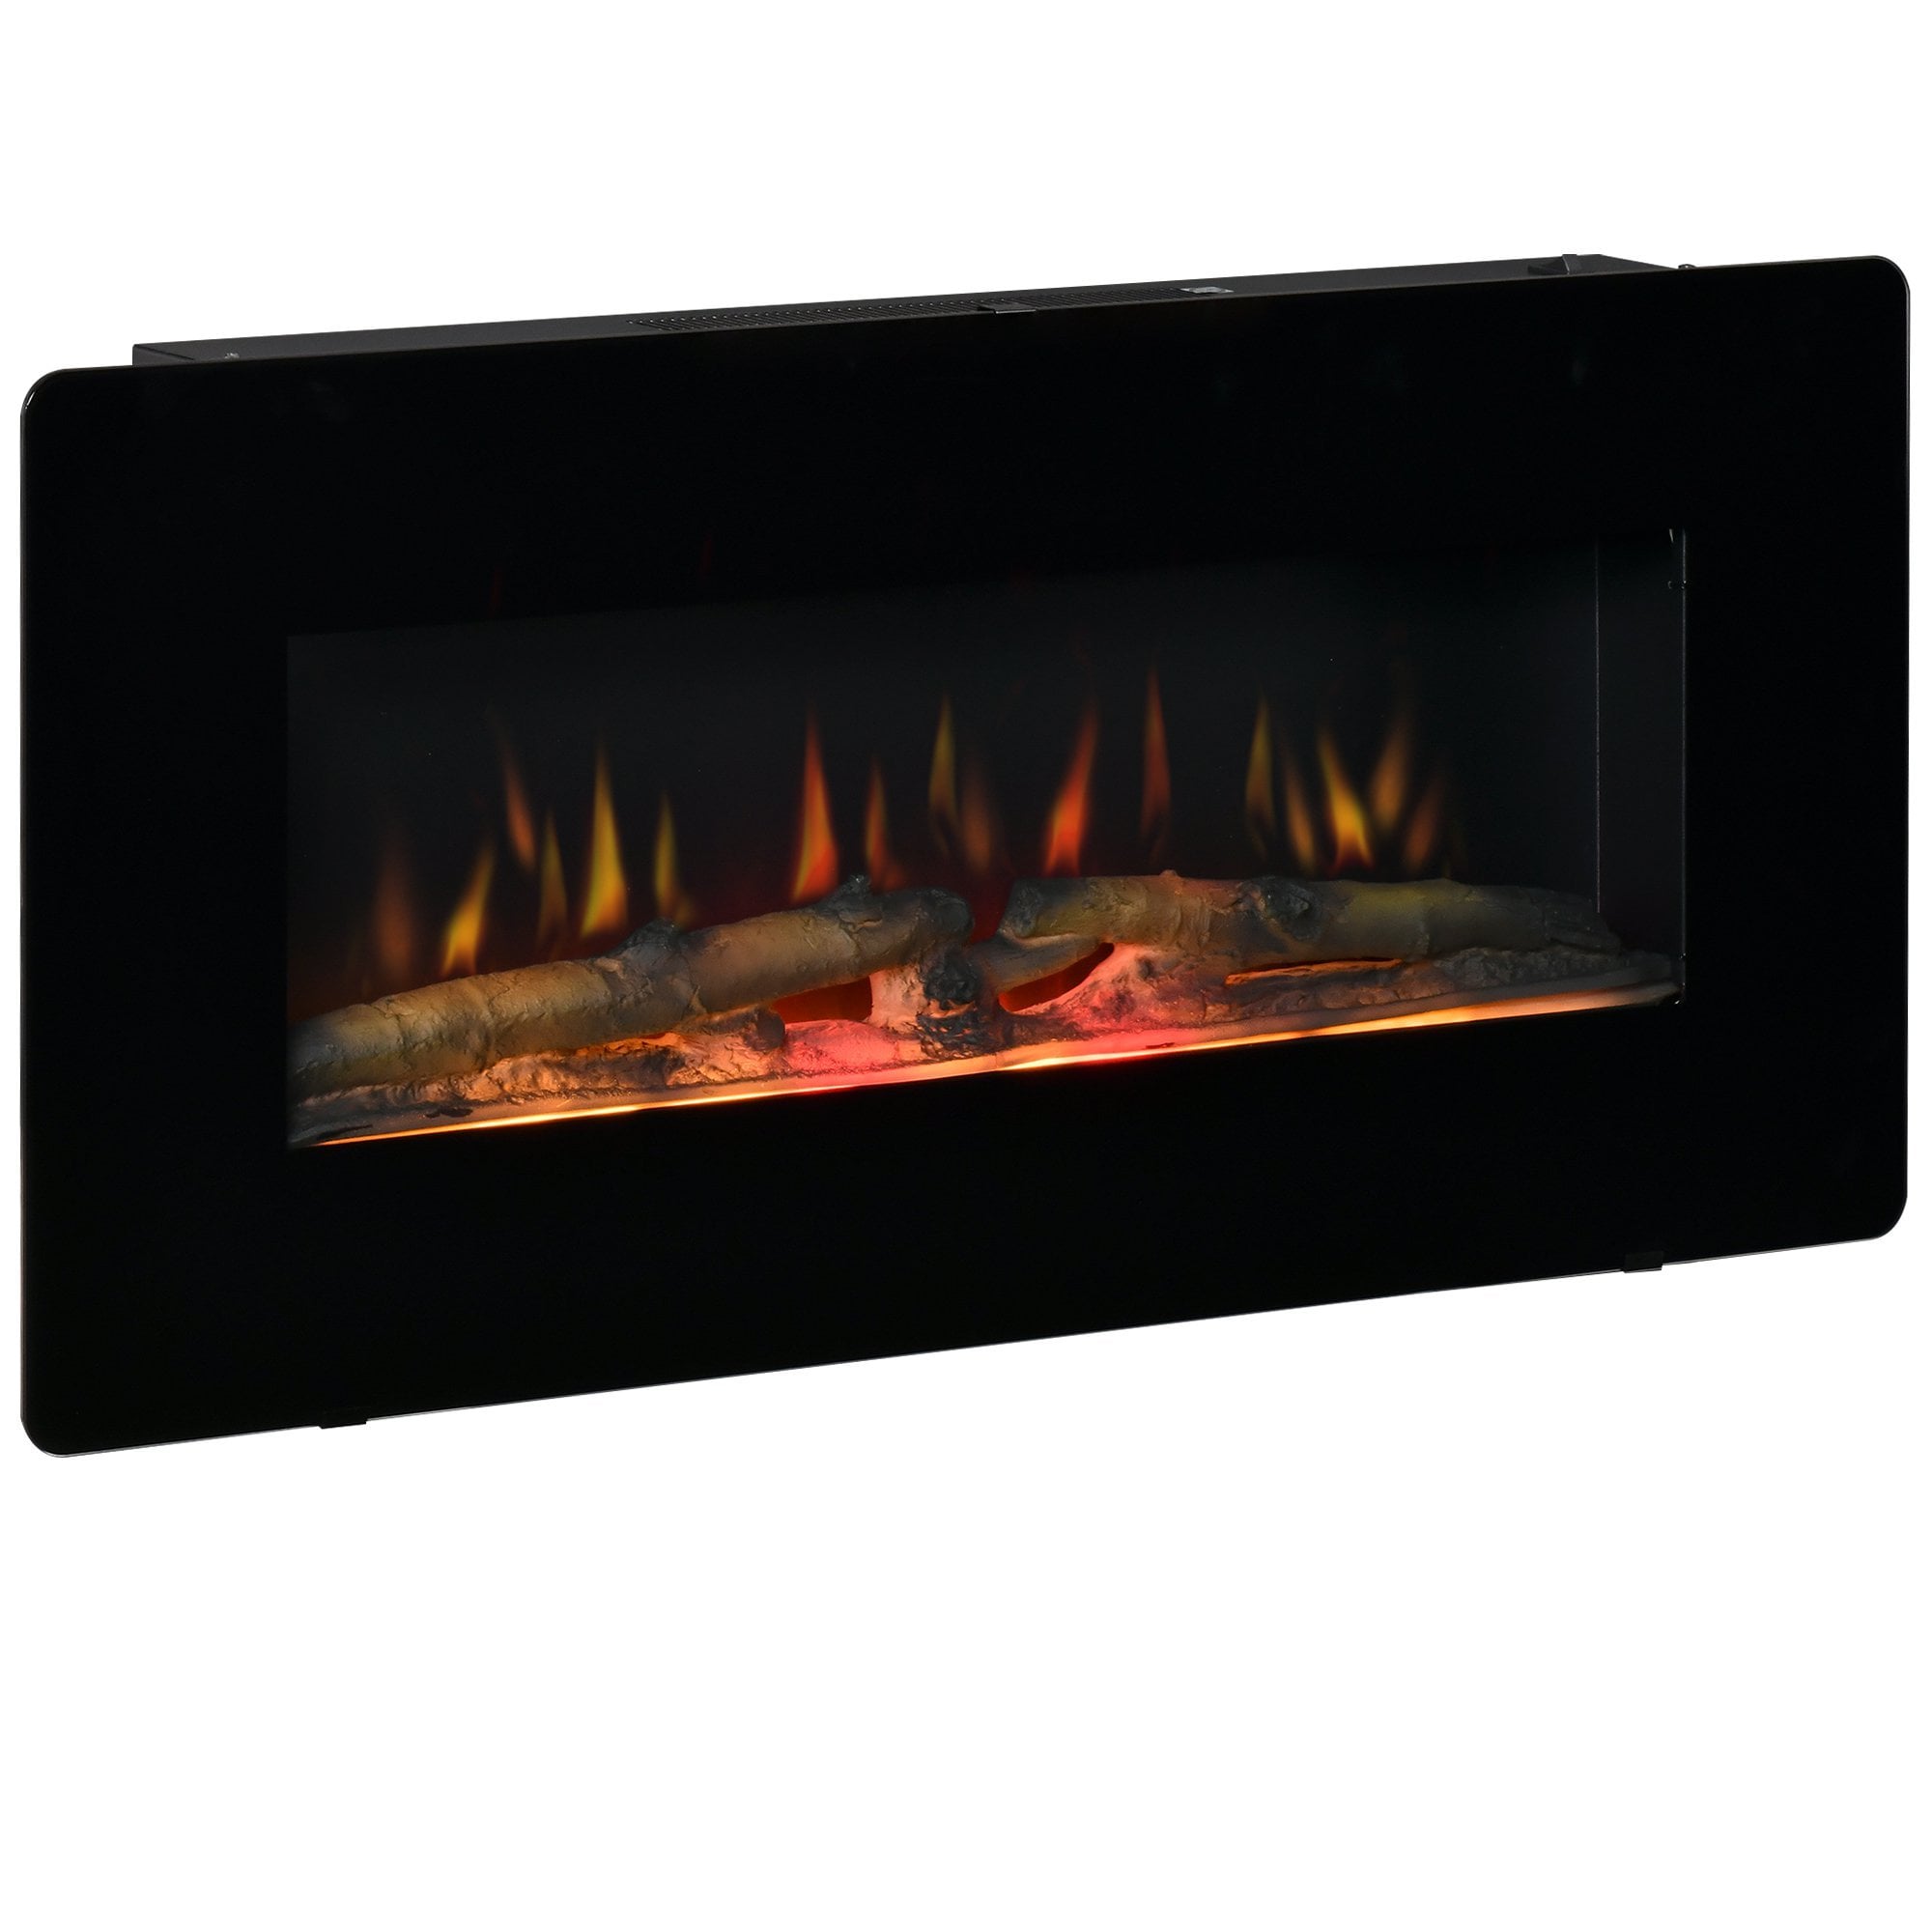 HOMCOM Electric Wall-Mounted Fireplace Heater with Adjustable Flame Effect - Remote Control - Timer - 1800/2000W - Black Wall-Mount W/ Effect Control